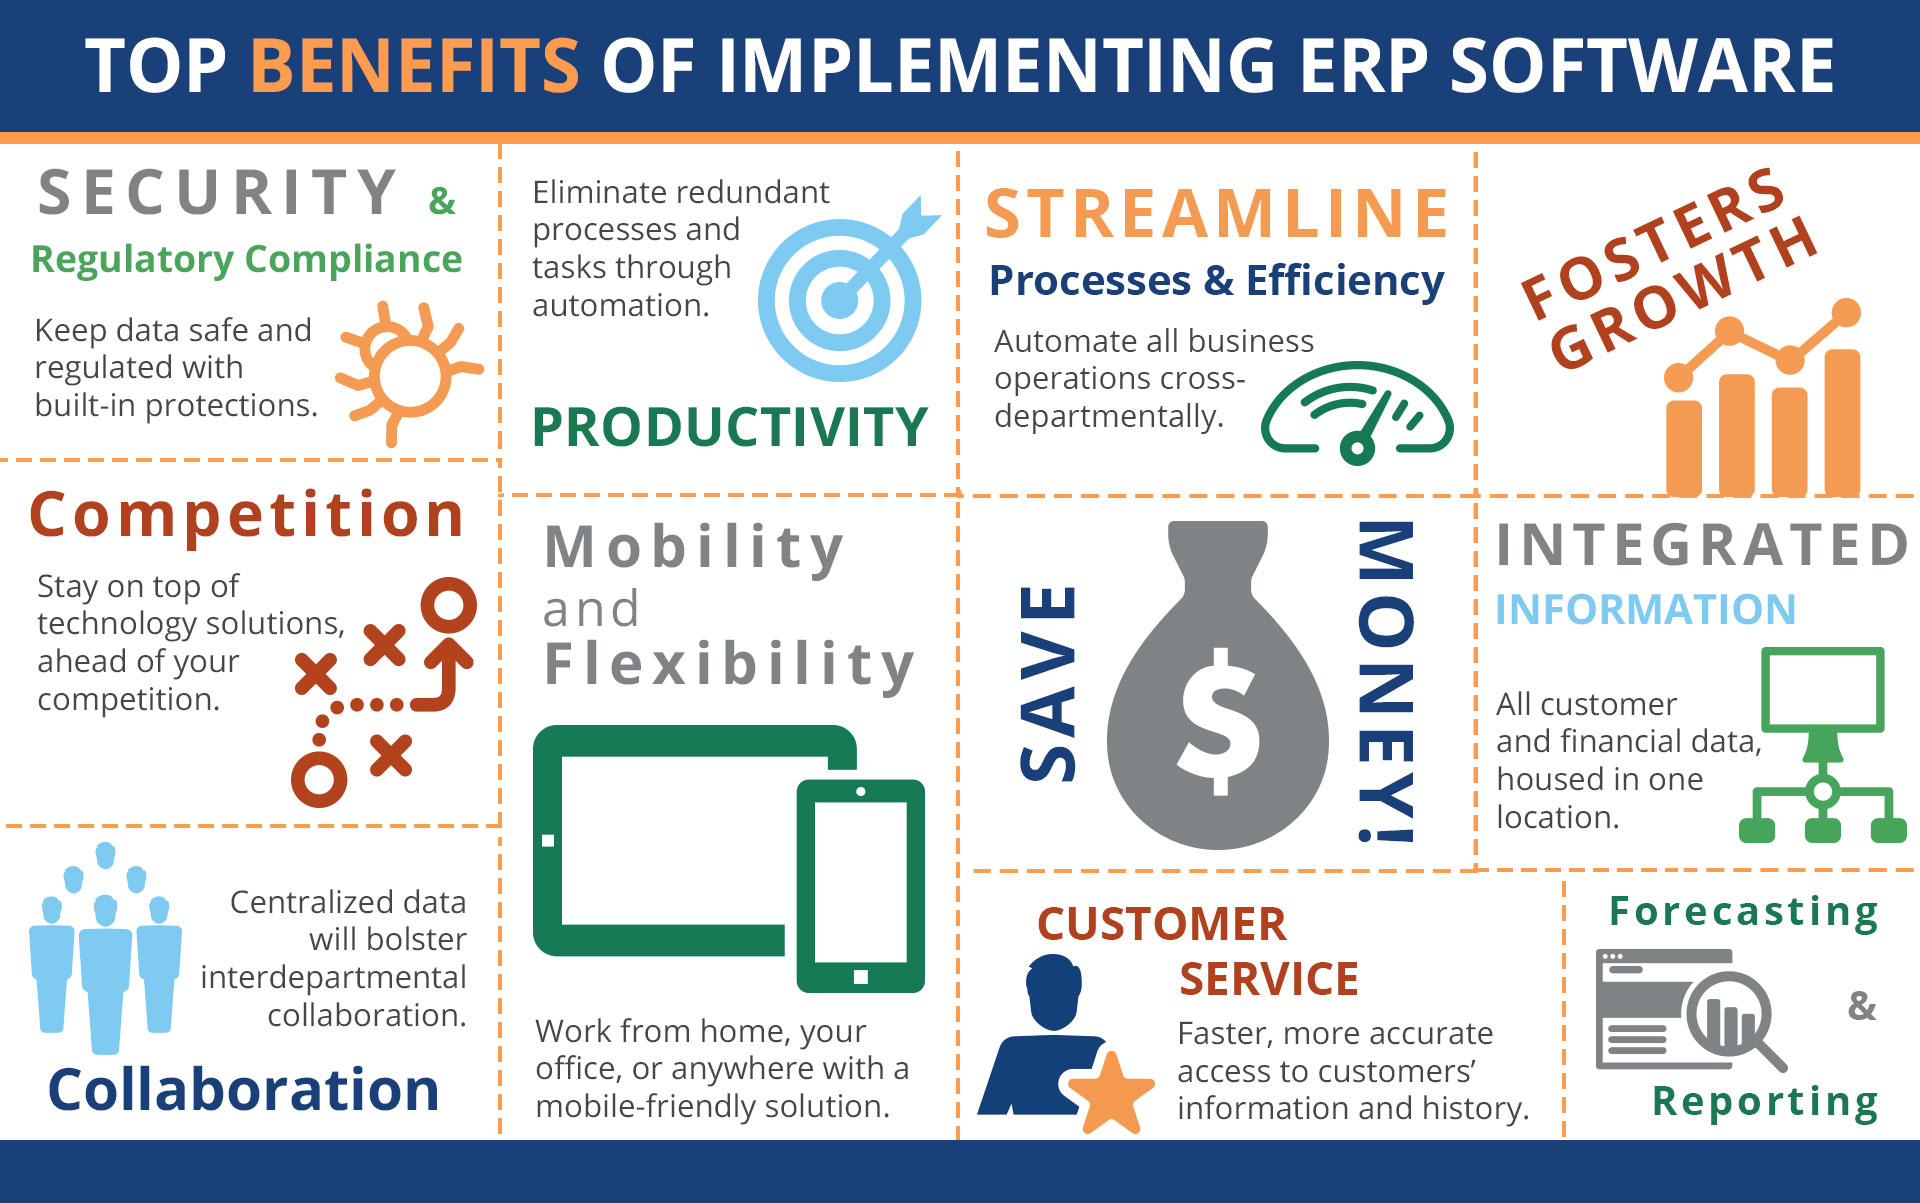 ADVANTAGES OF IMPLEMENTING ERP SOFTWARE